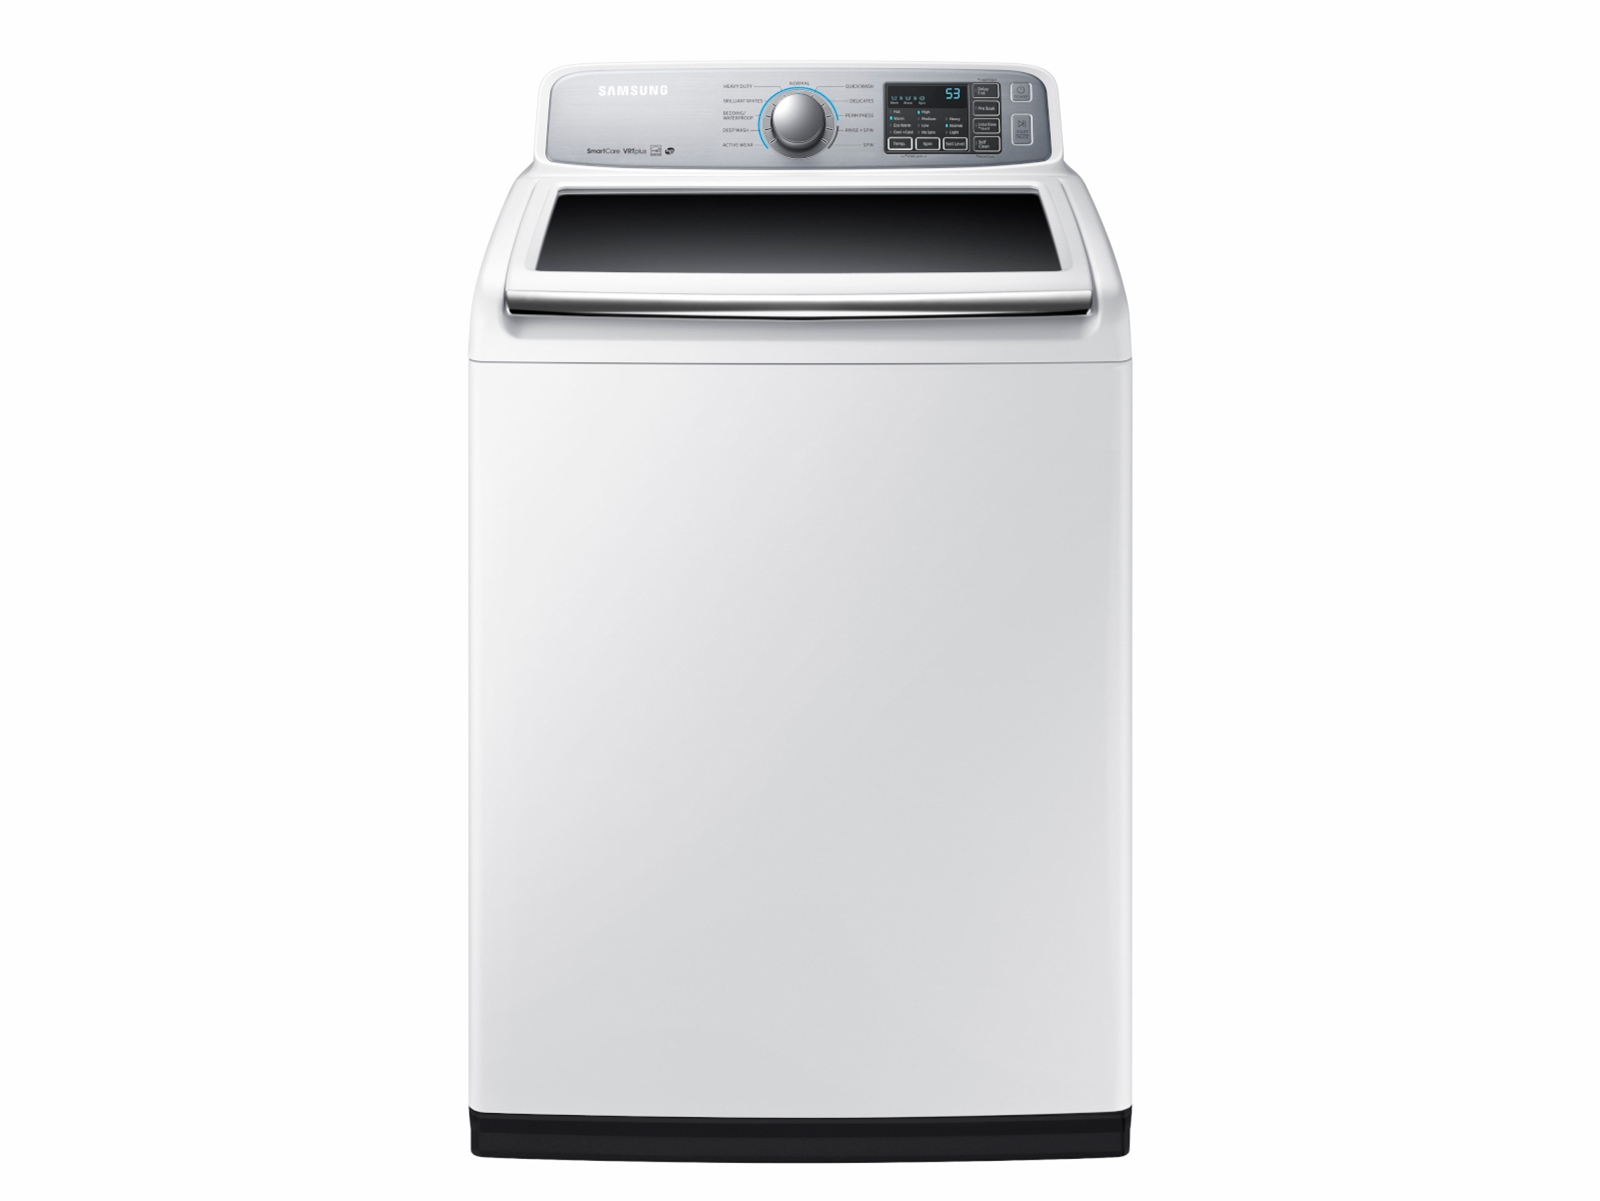 ft. Top Load Washer in White Washer - WA50M7450AW/A4 | Samsung